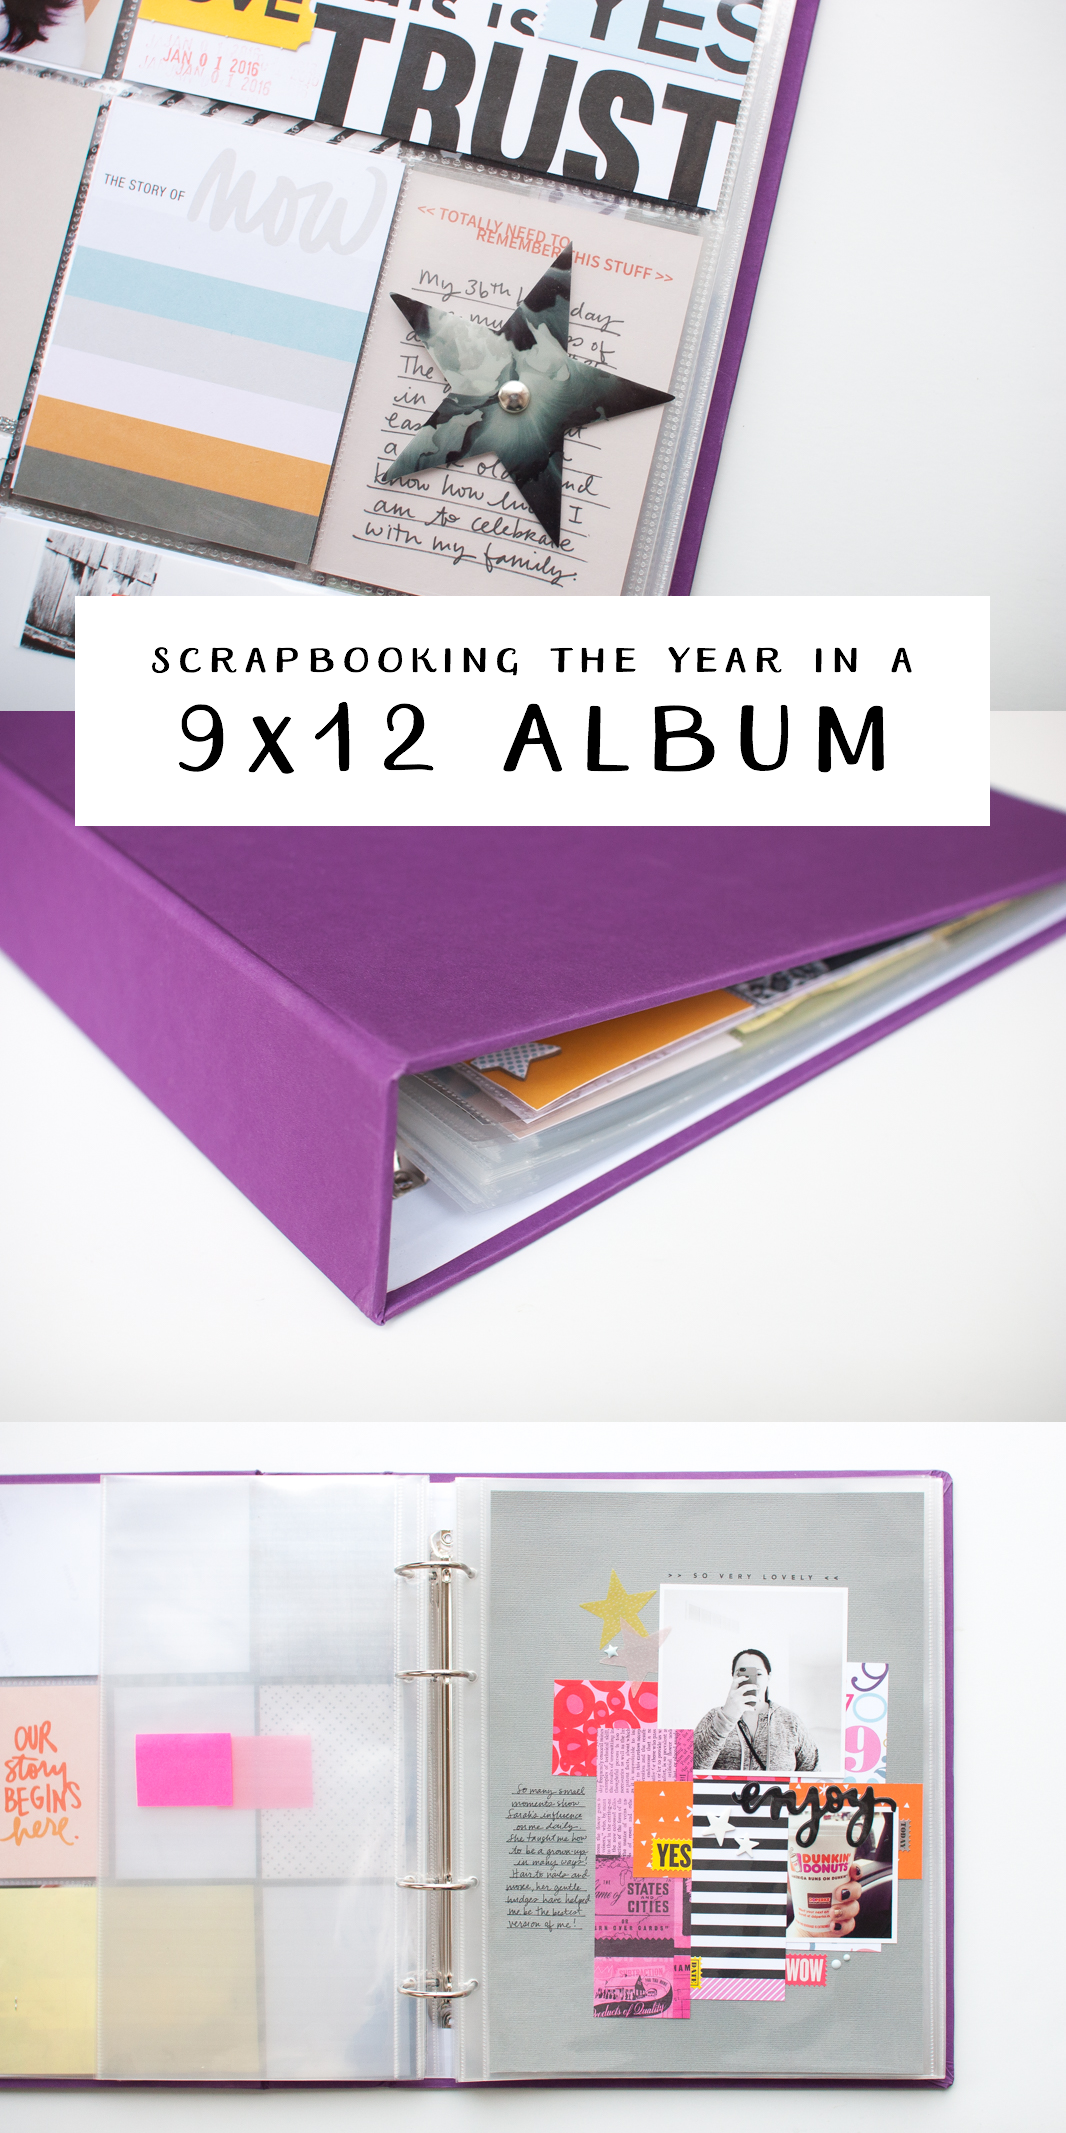 Scrapbooking the Year in 9x12